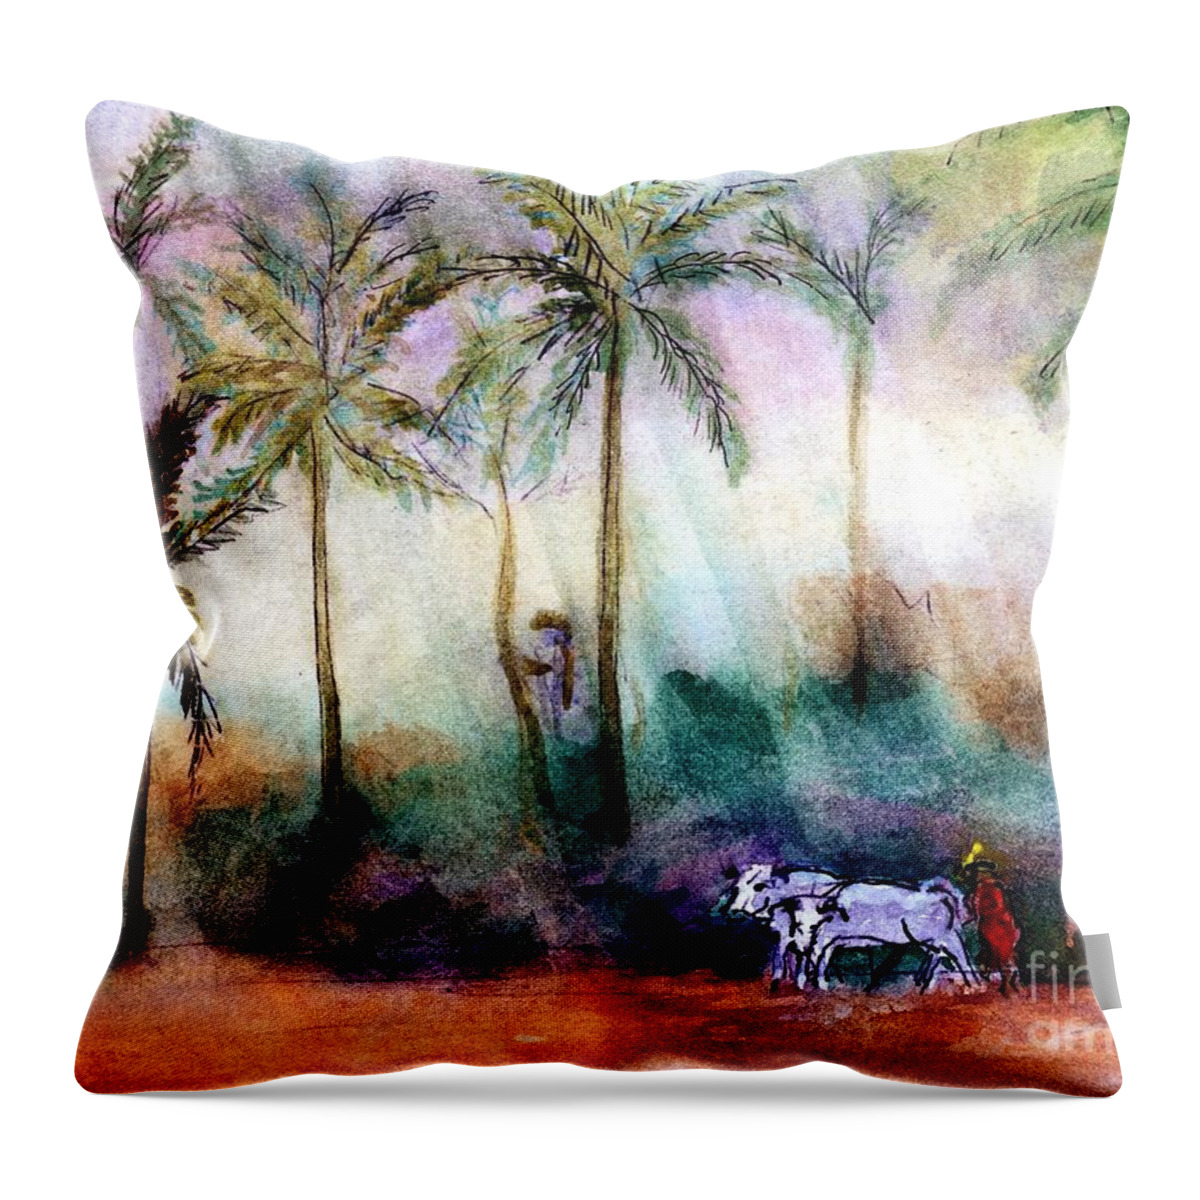 Burma Throw Pillow featuring the painting Pair of Oxen by Randy Sprout